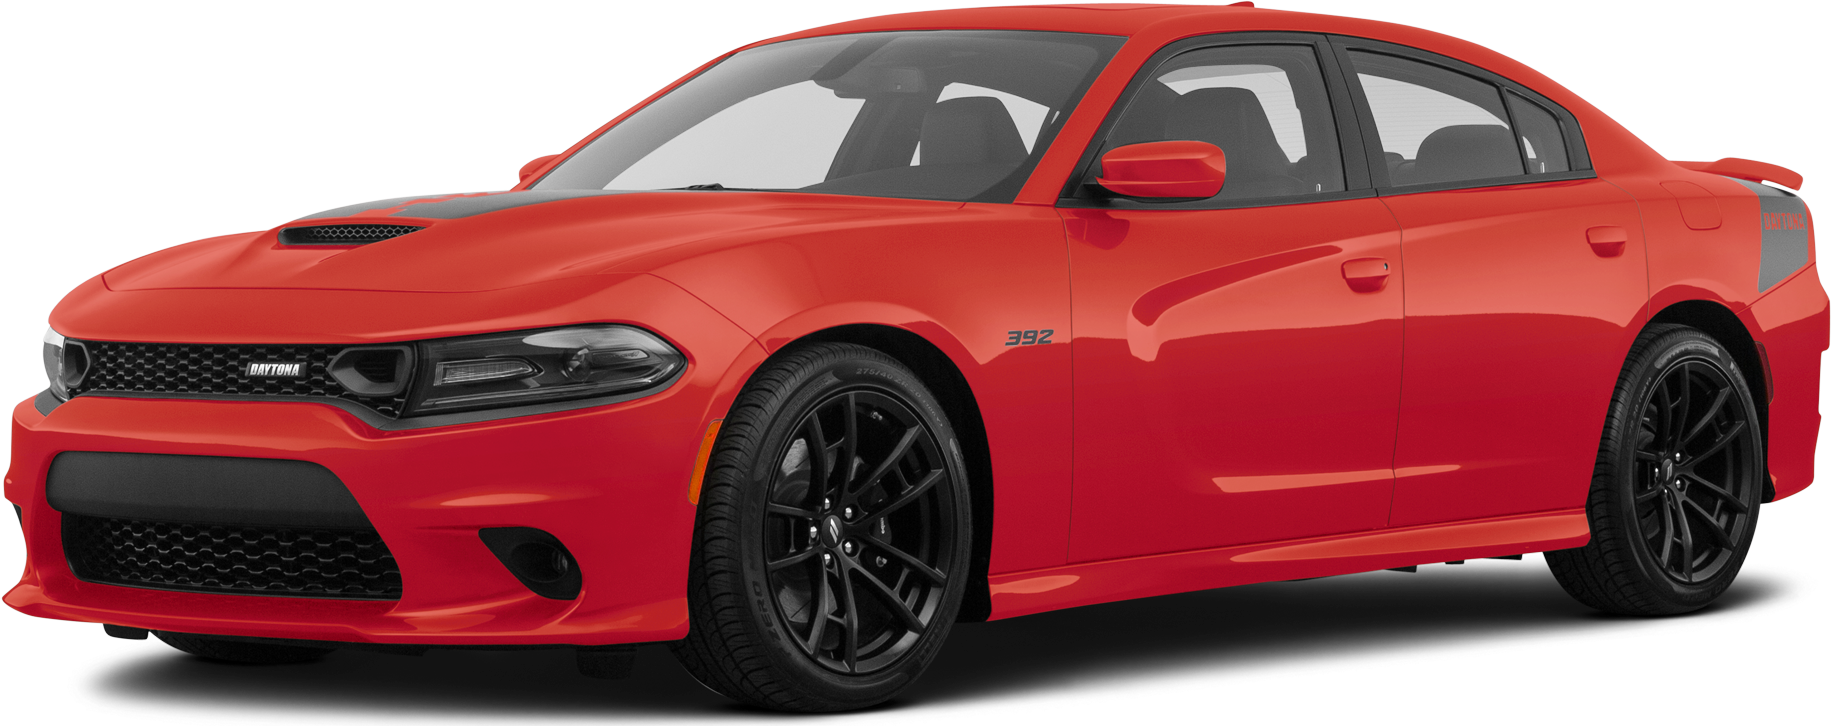 Dodge Charger Reviews Pricing Specs Kelley Blue Book